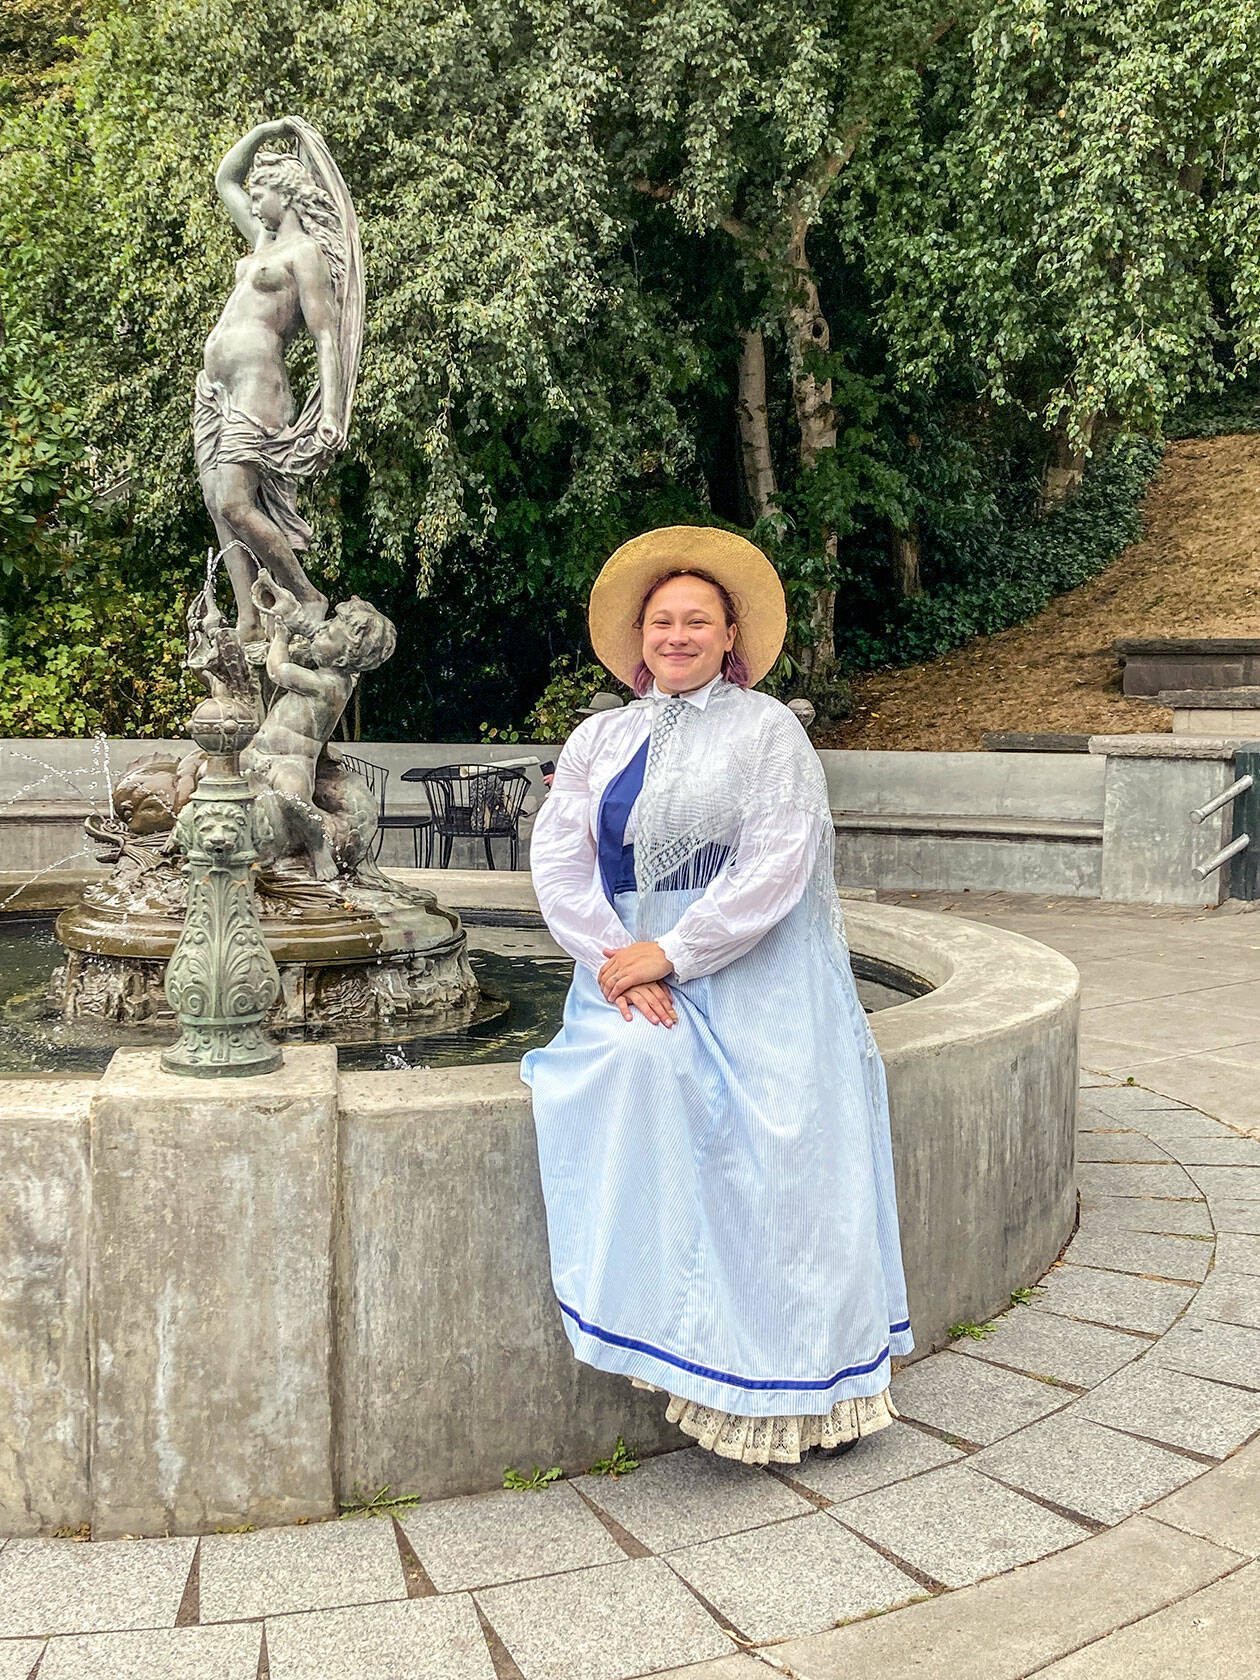 Key City Public Theatre’s Bry Kifolo leads this weekend’s Port Townsend Hidden History walking tours at 2 p.m. today, Saturday and Sunday. For information, see keycitypublictheatre.org. (Port Townsend Main Street Program)